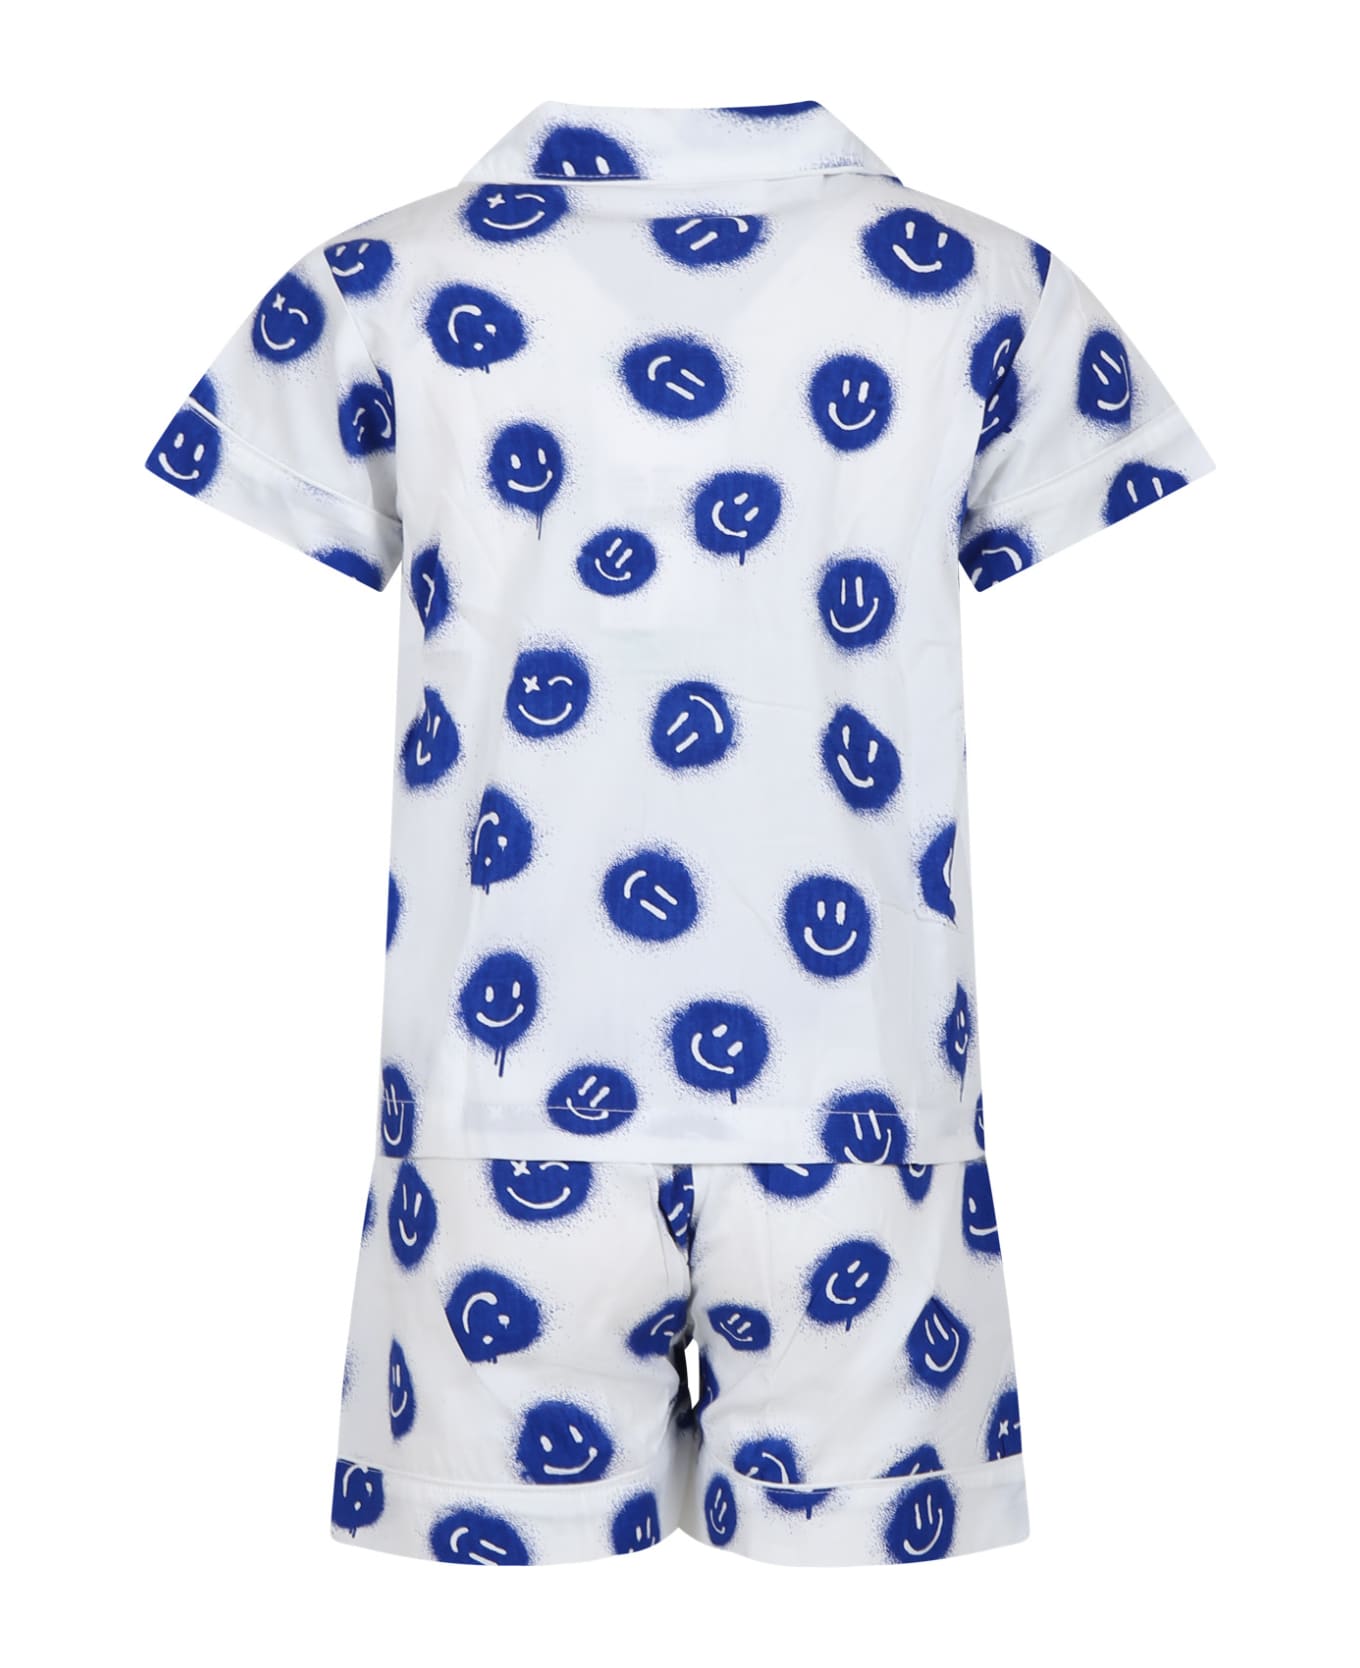 Molo White Pajamas For Kids With Smiley - Blue ジャンプスーツ